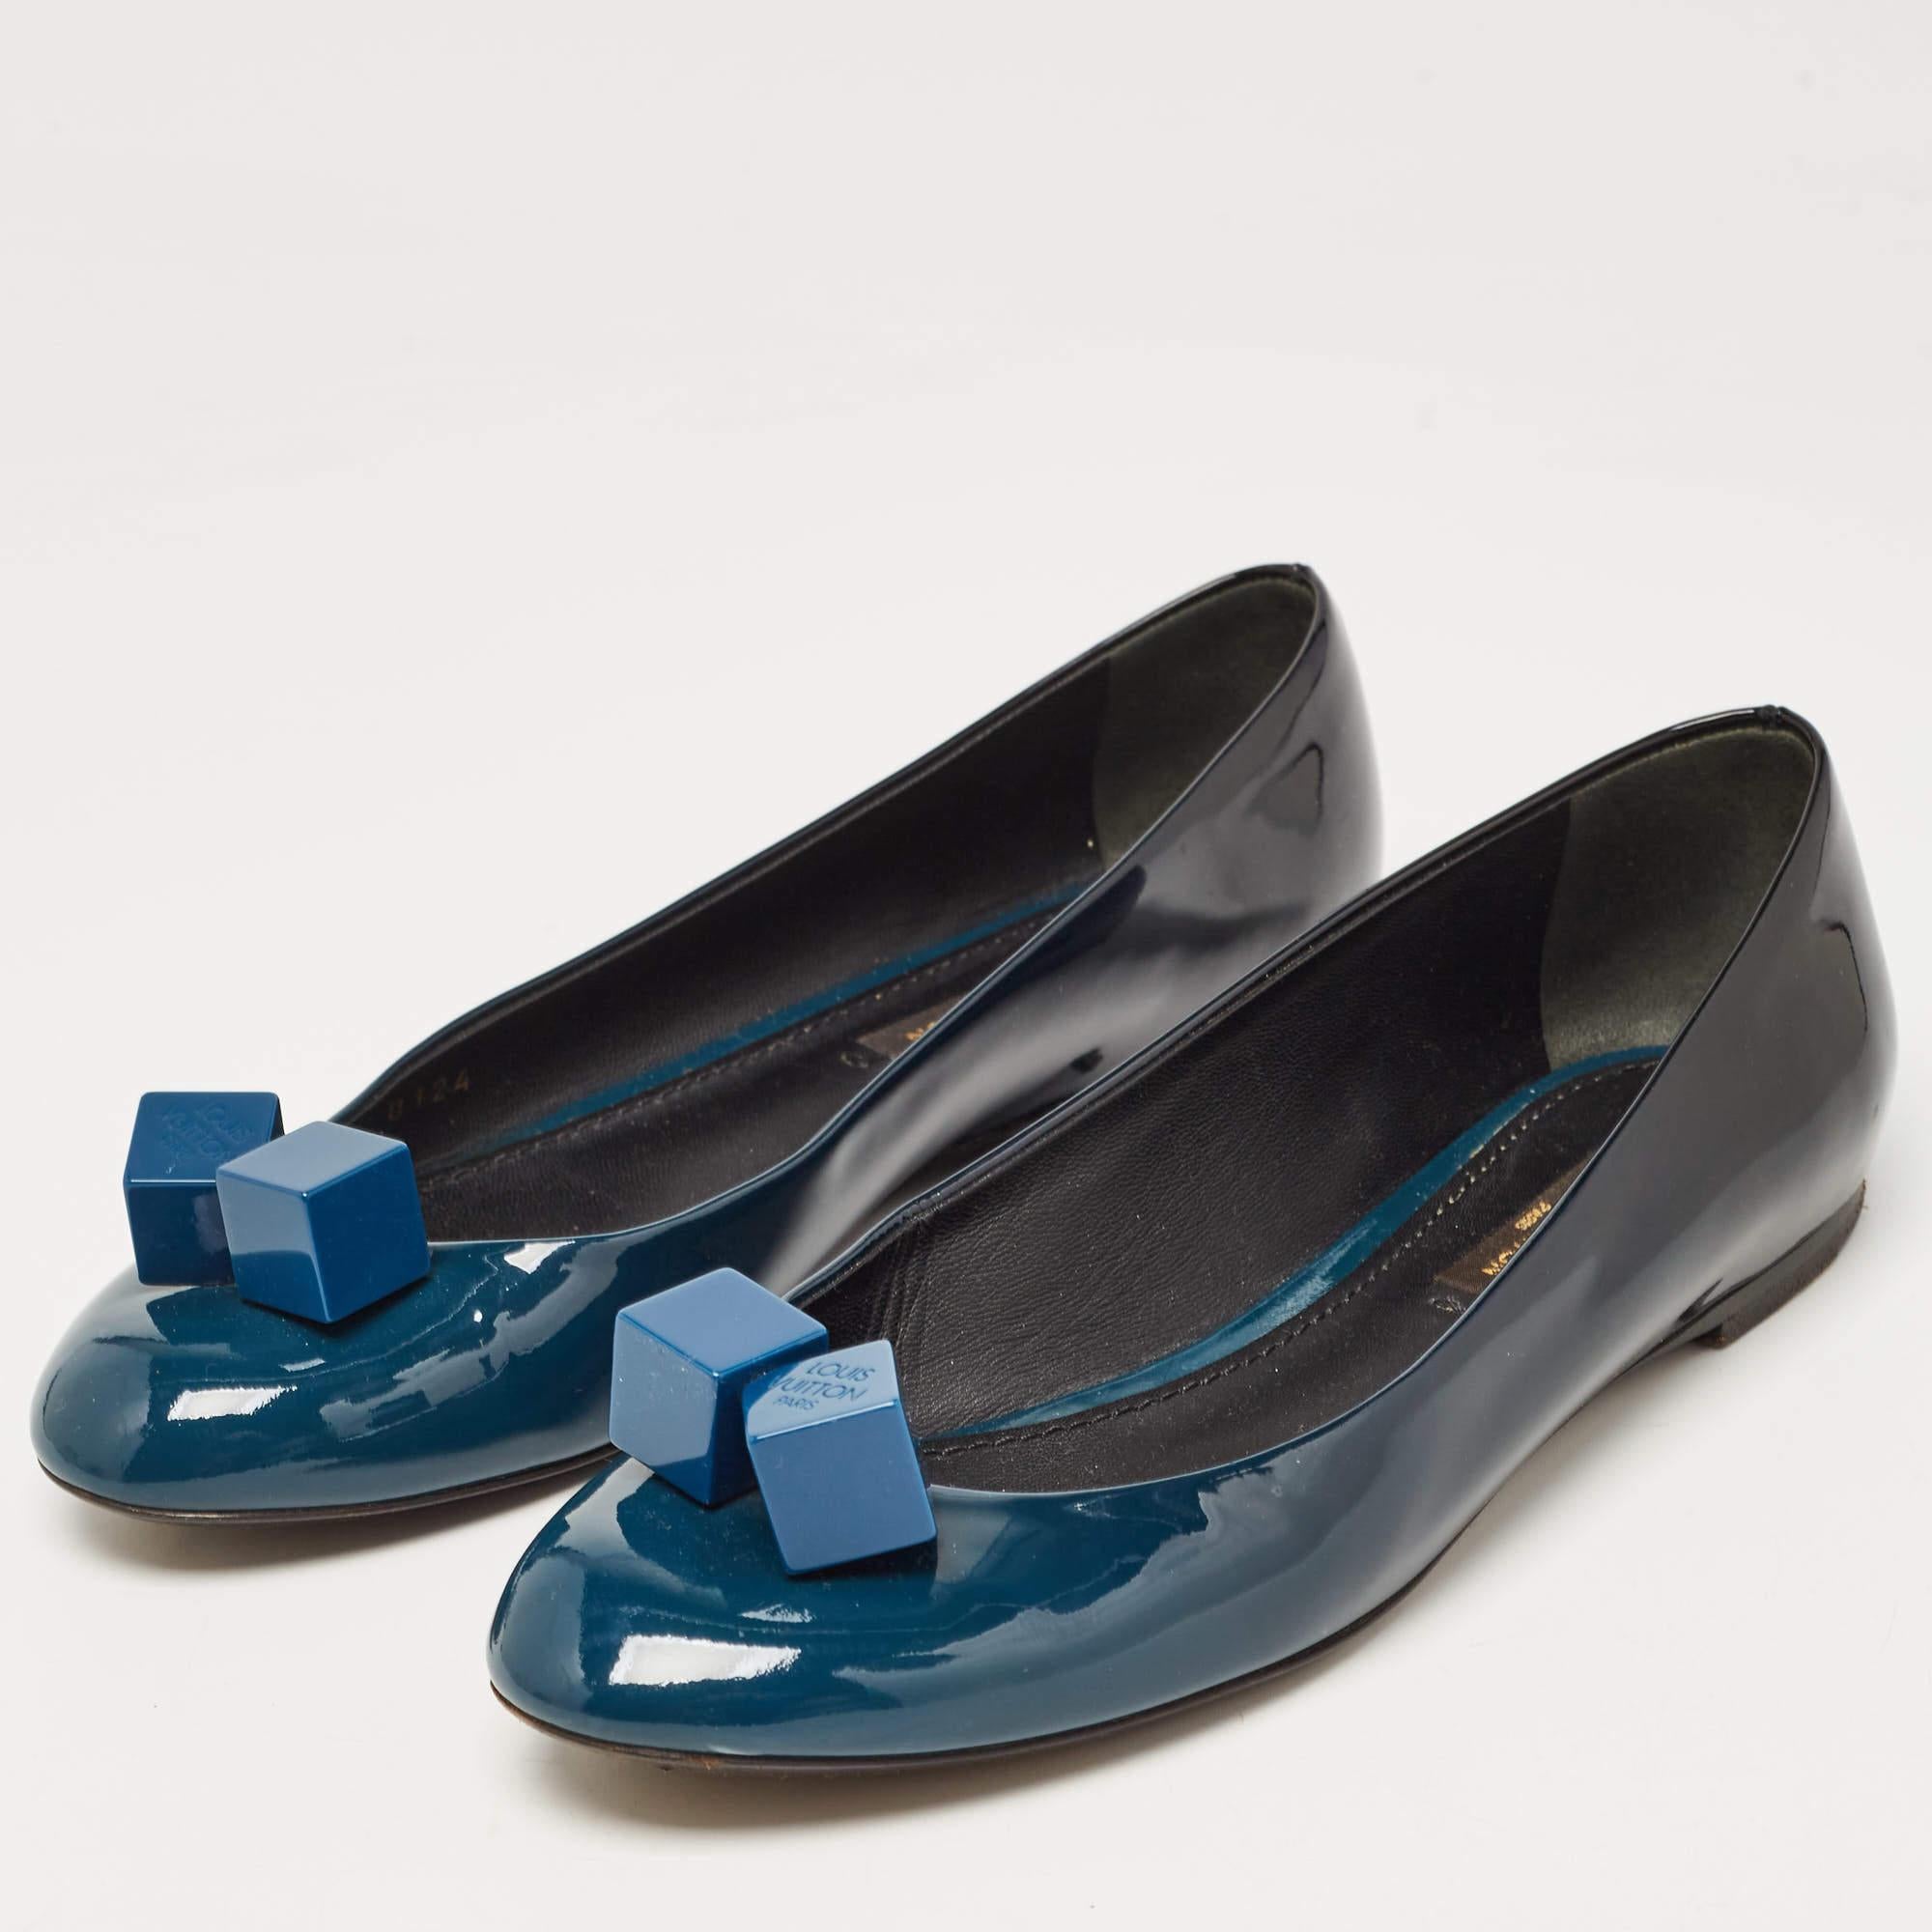 These ballet flats by Louis Vuitton are comfortable and chic to be matched with everything from a shirt dress to skinny jeans. Crafted from patent leather, they feature round toes along with dice details on the vamps.

